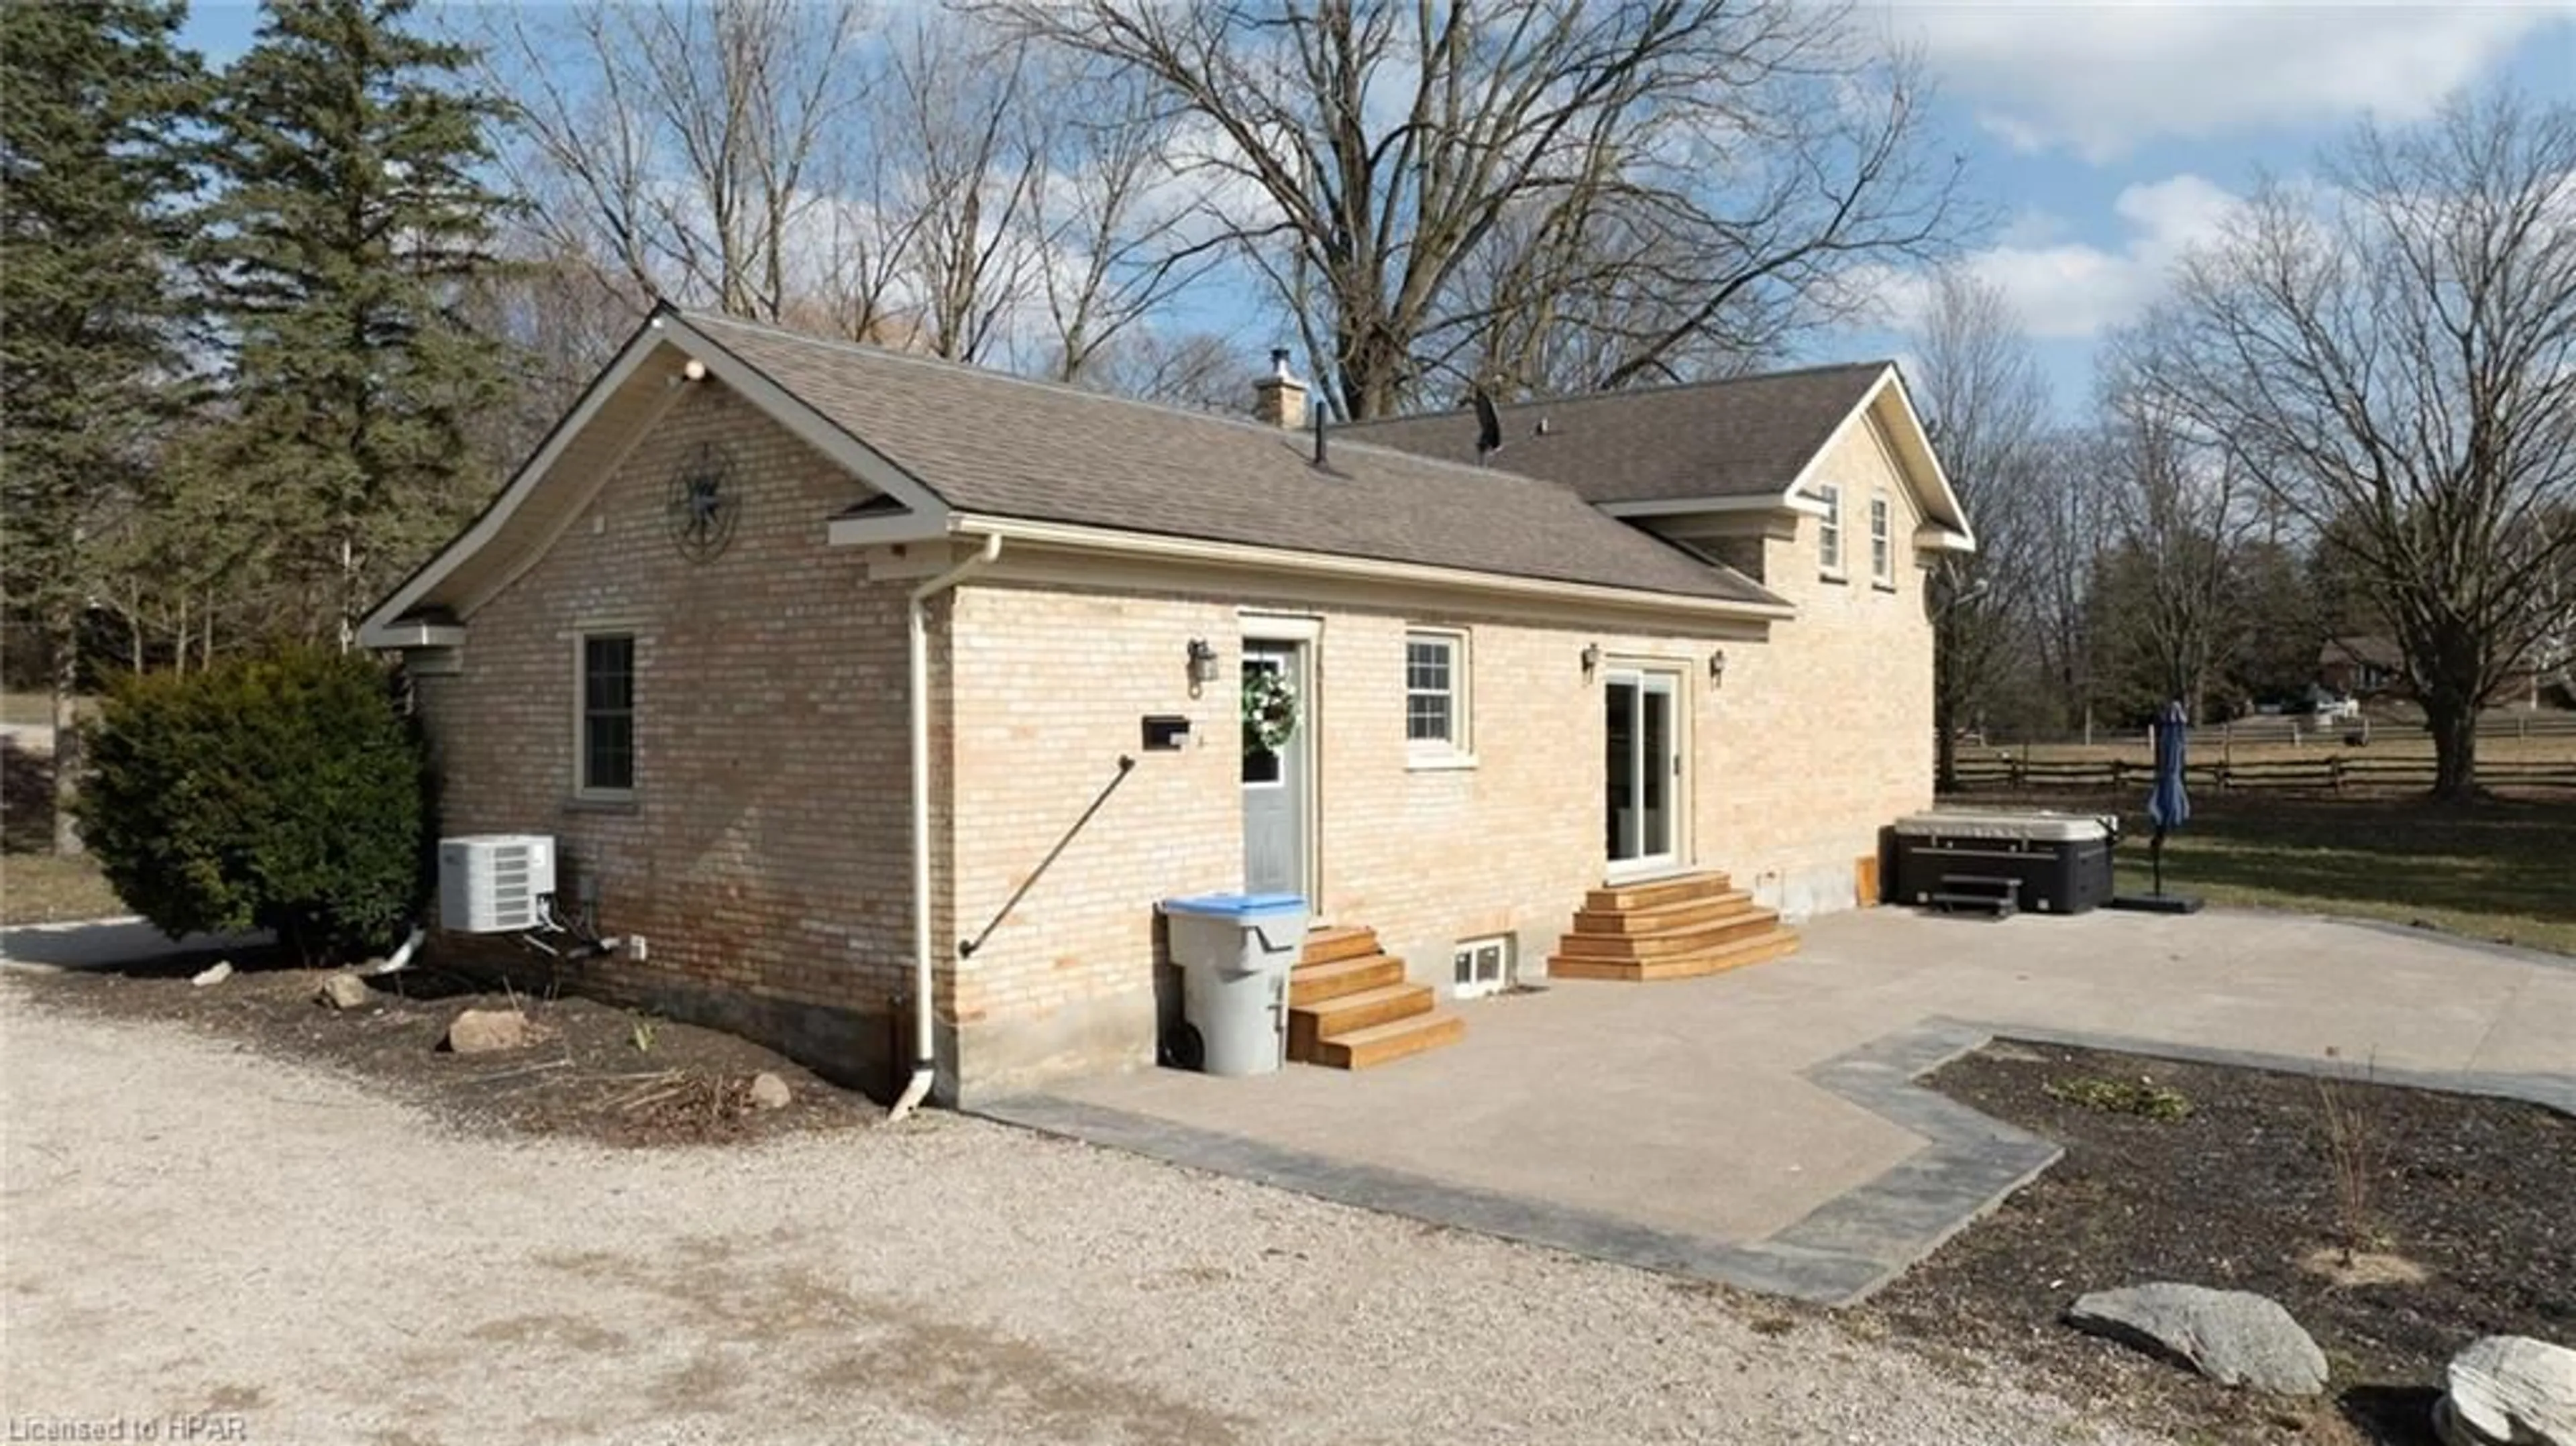 Home with brick exterior material for 38829 Hullett-Mckillop Rd, Central Huron Ontario N0M 1E0